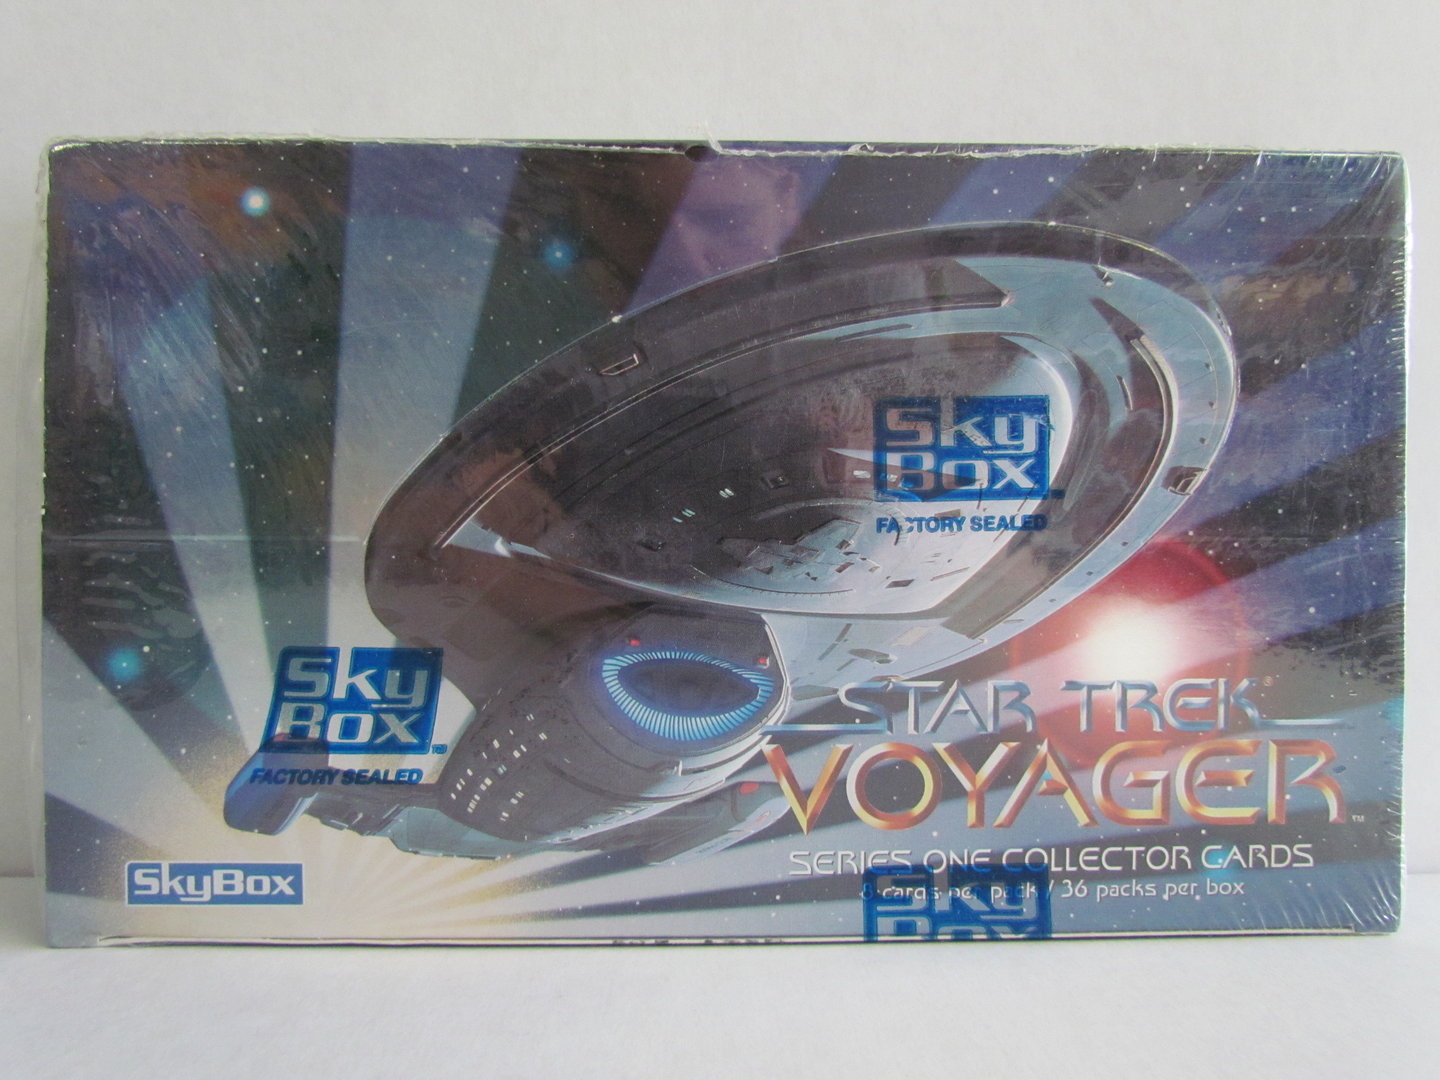 The Complete Star Trek Voyager sealed box Collectable Cards 